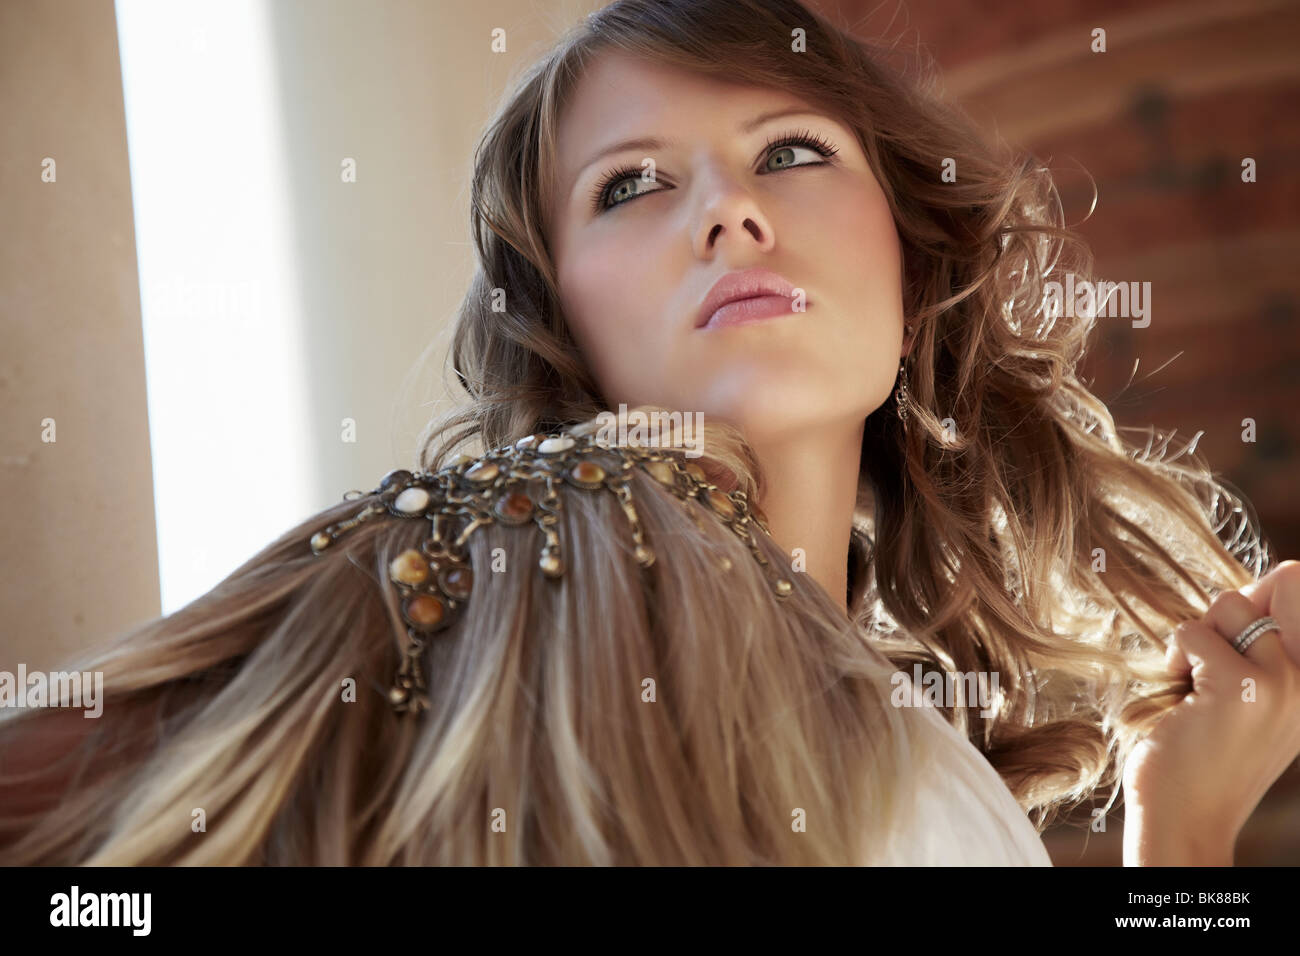 Portrait of a young woman wearing shoulder jewelry and beads Stock Photo